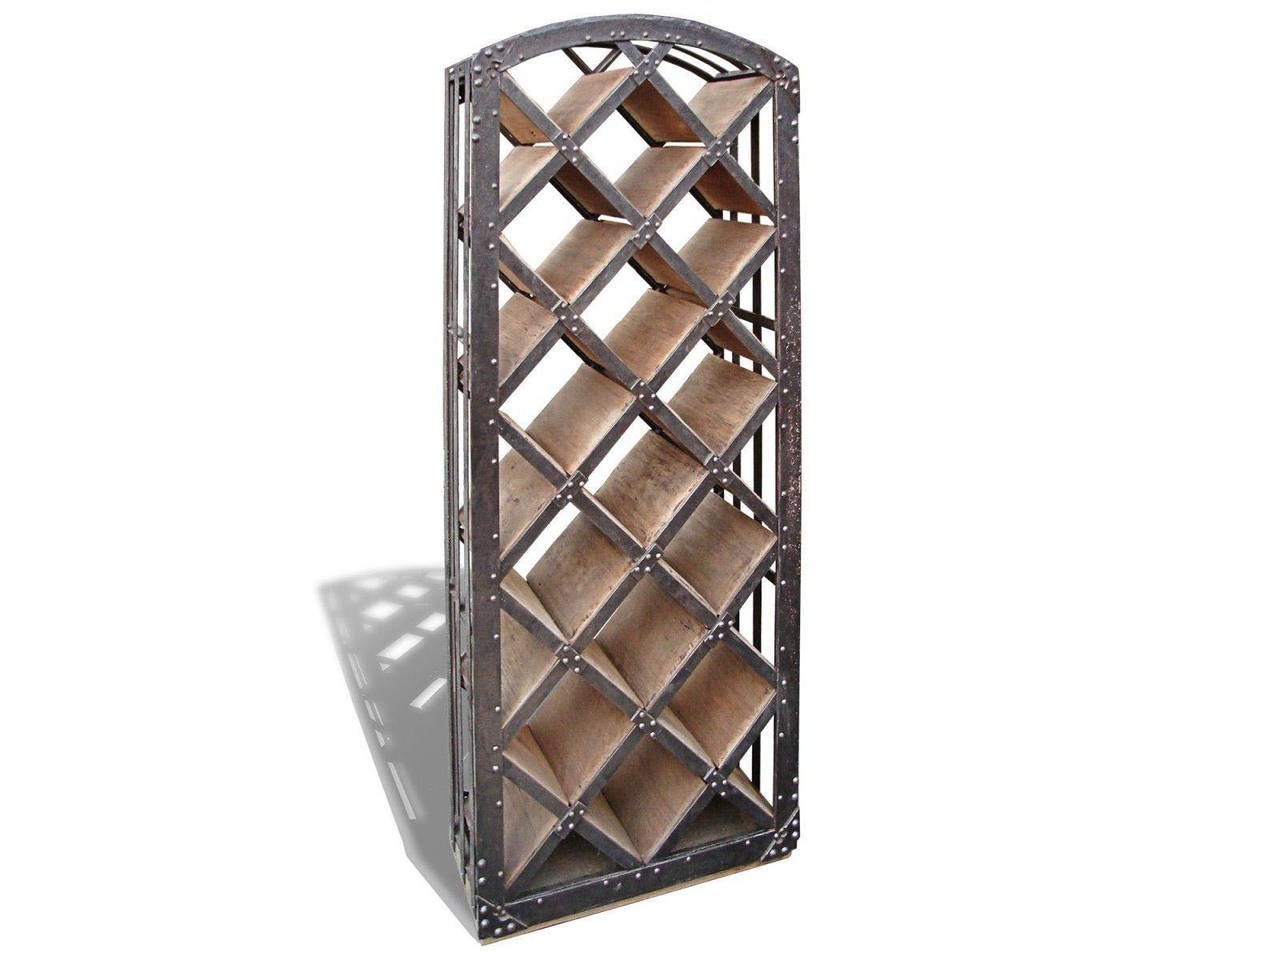 Rustic wrought iron and wood wine rack.